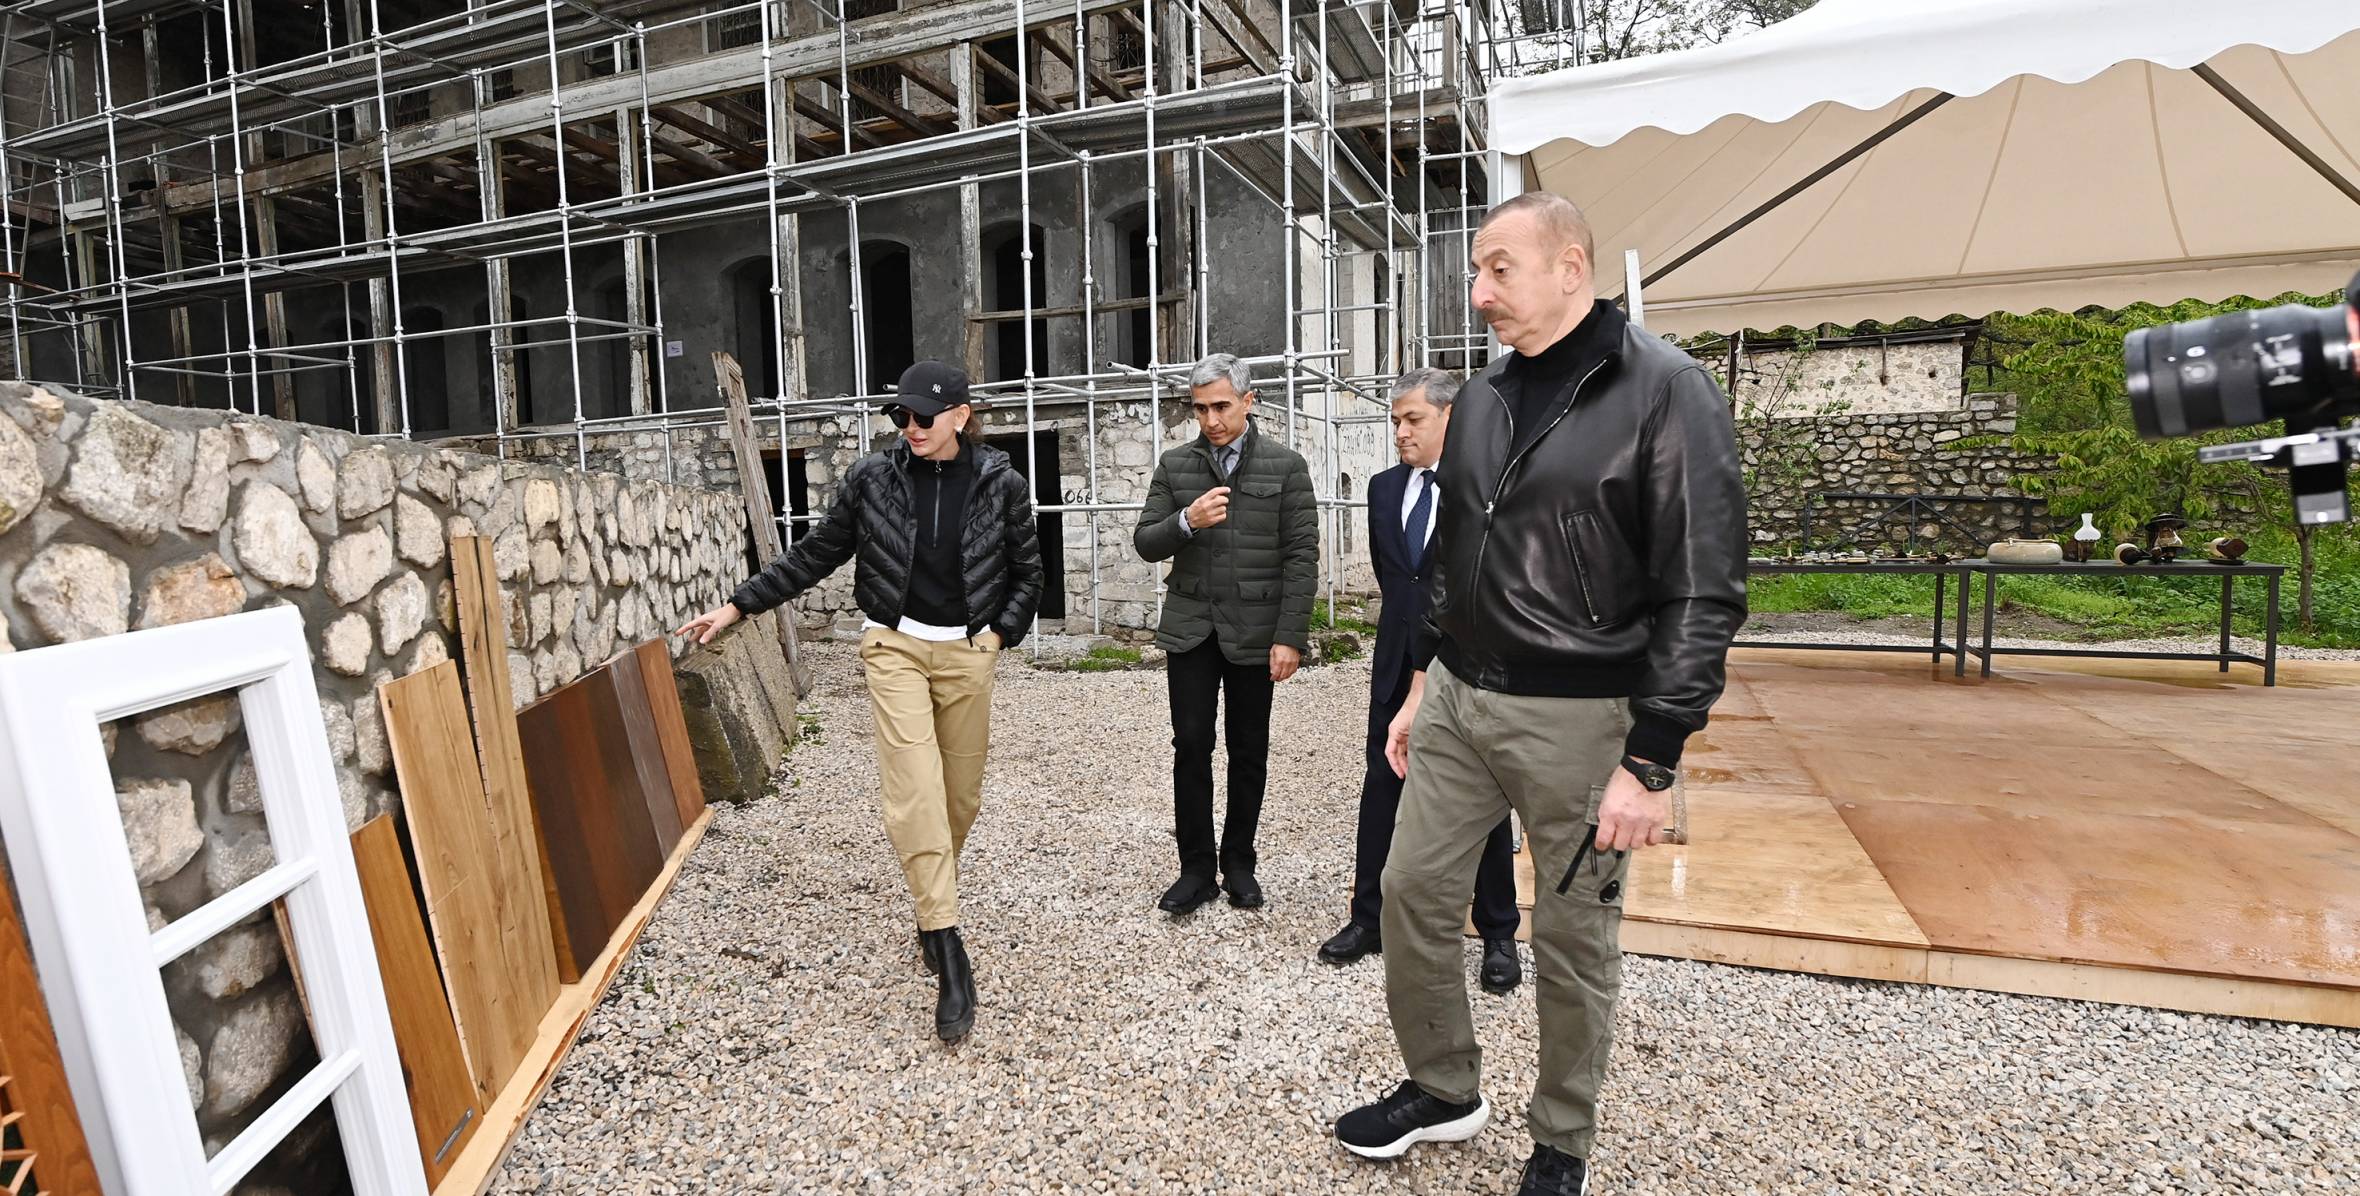 Ilham Aliyev and First Lady Mehriban Aliyeva visited future location site of Shusha Boutique Hotel